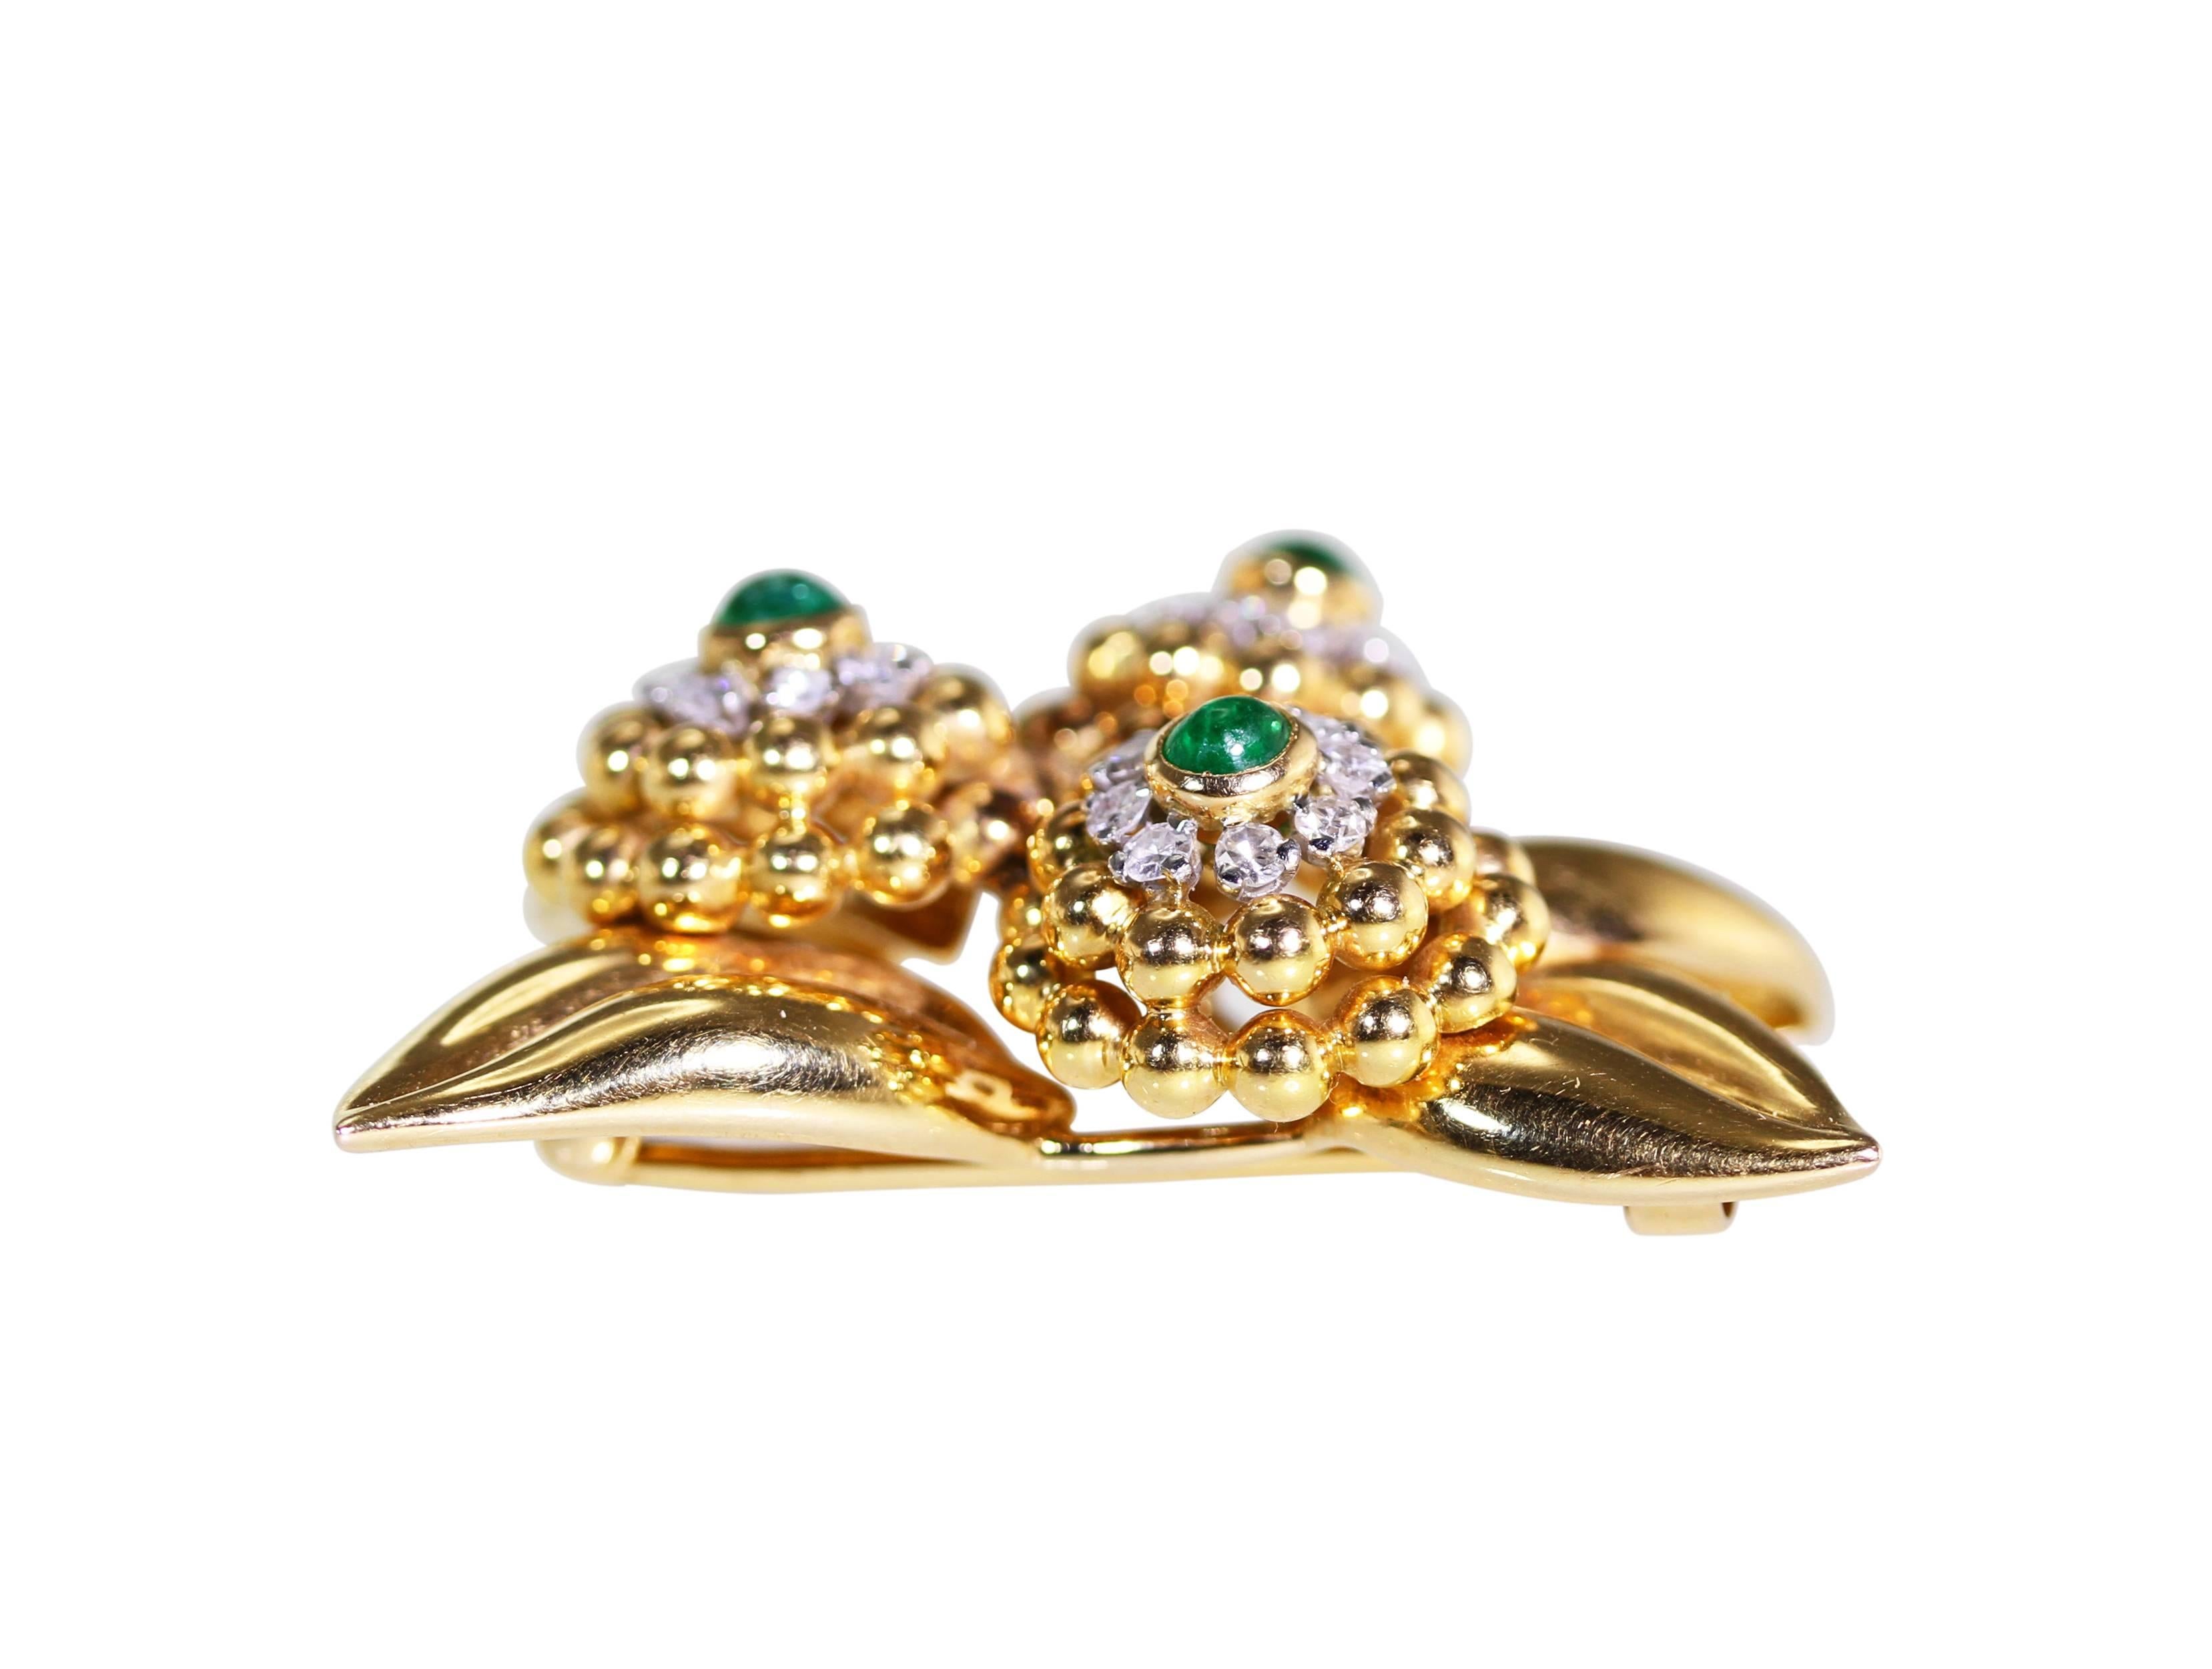 Retro Emerald Diamond Gold Floral Brooch and Earclips For Sale 1